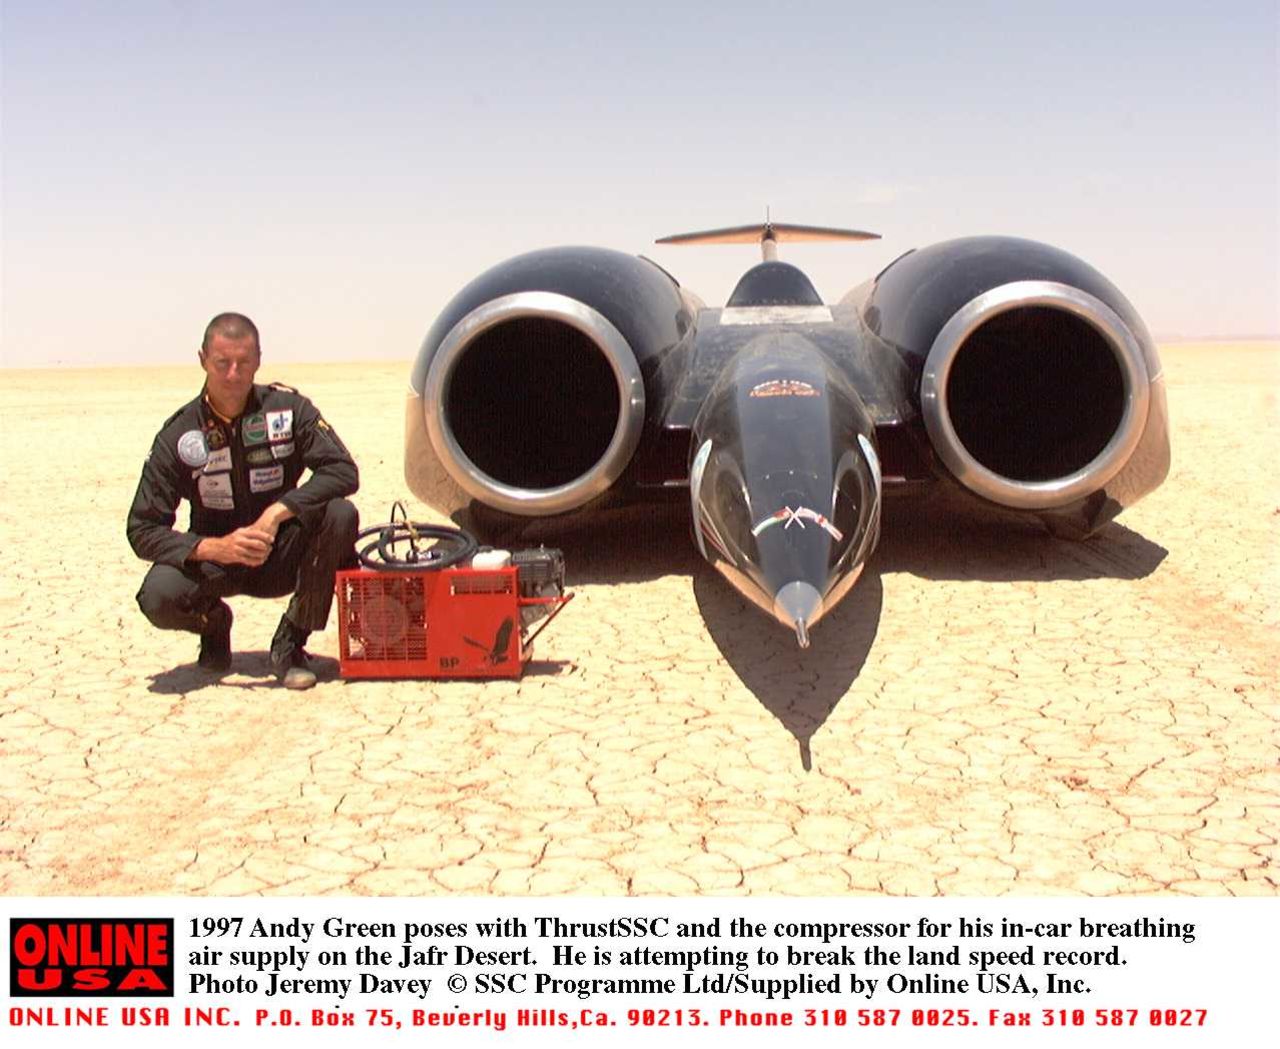 The current world record is held by this car, the Thrust SSC, which obtained it in 1997.